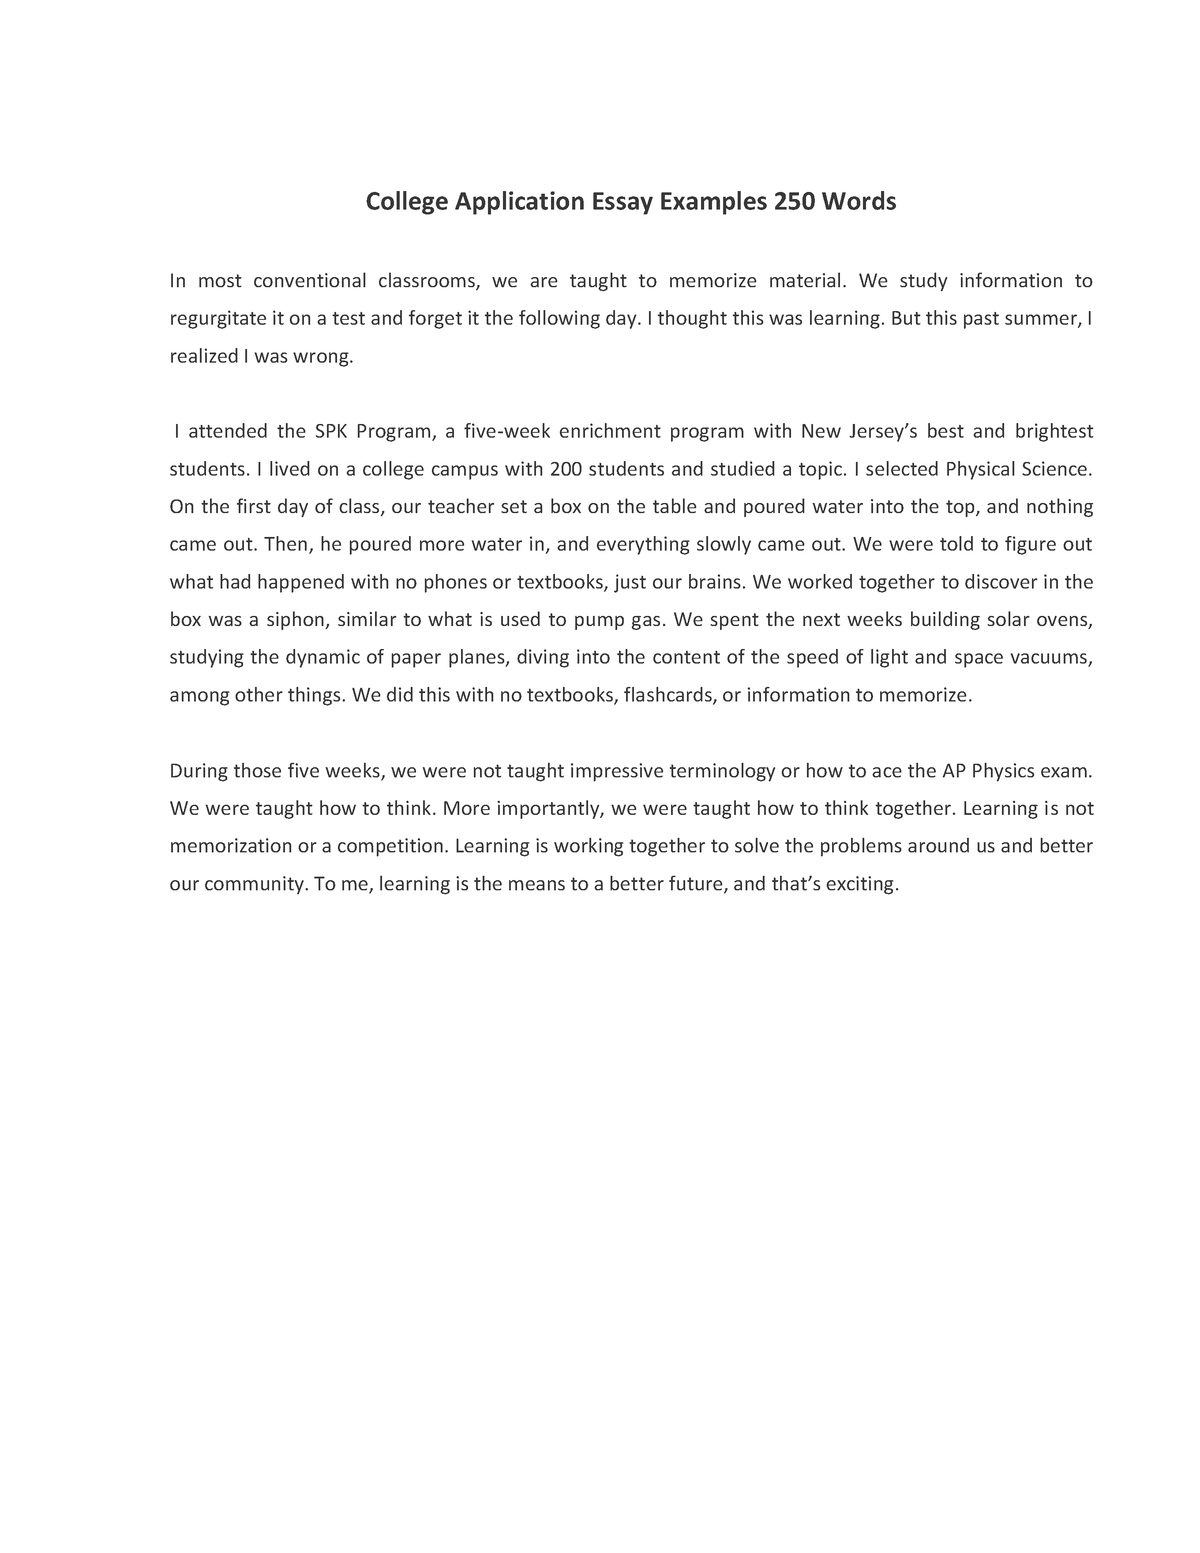 college entry essay examples